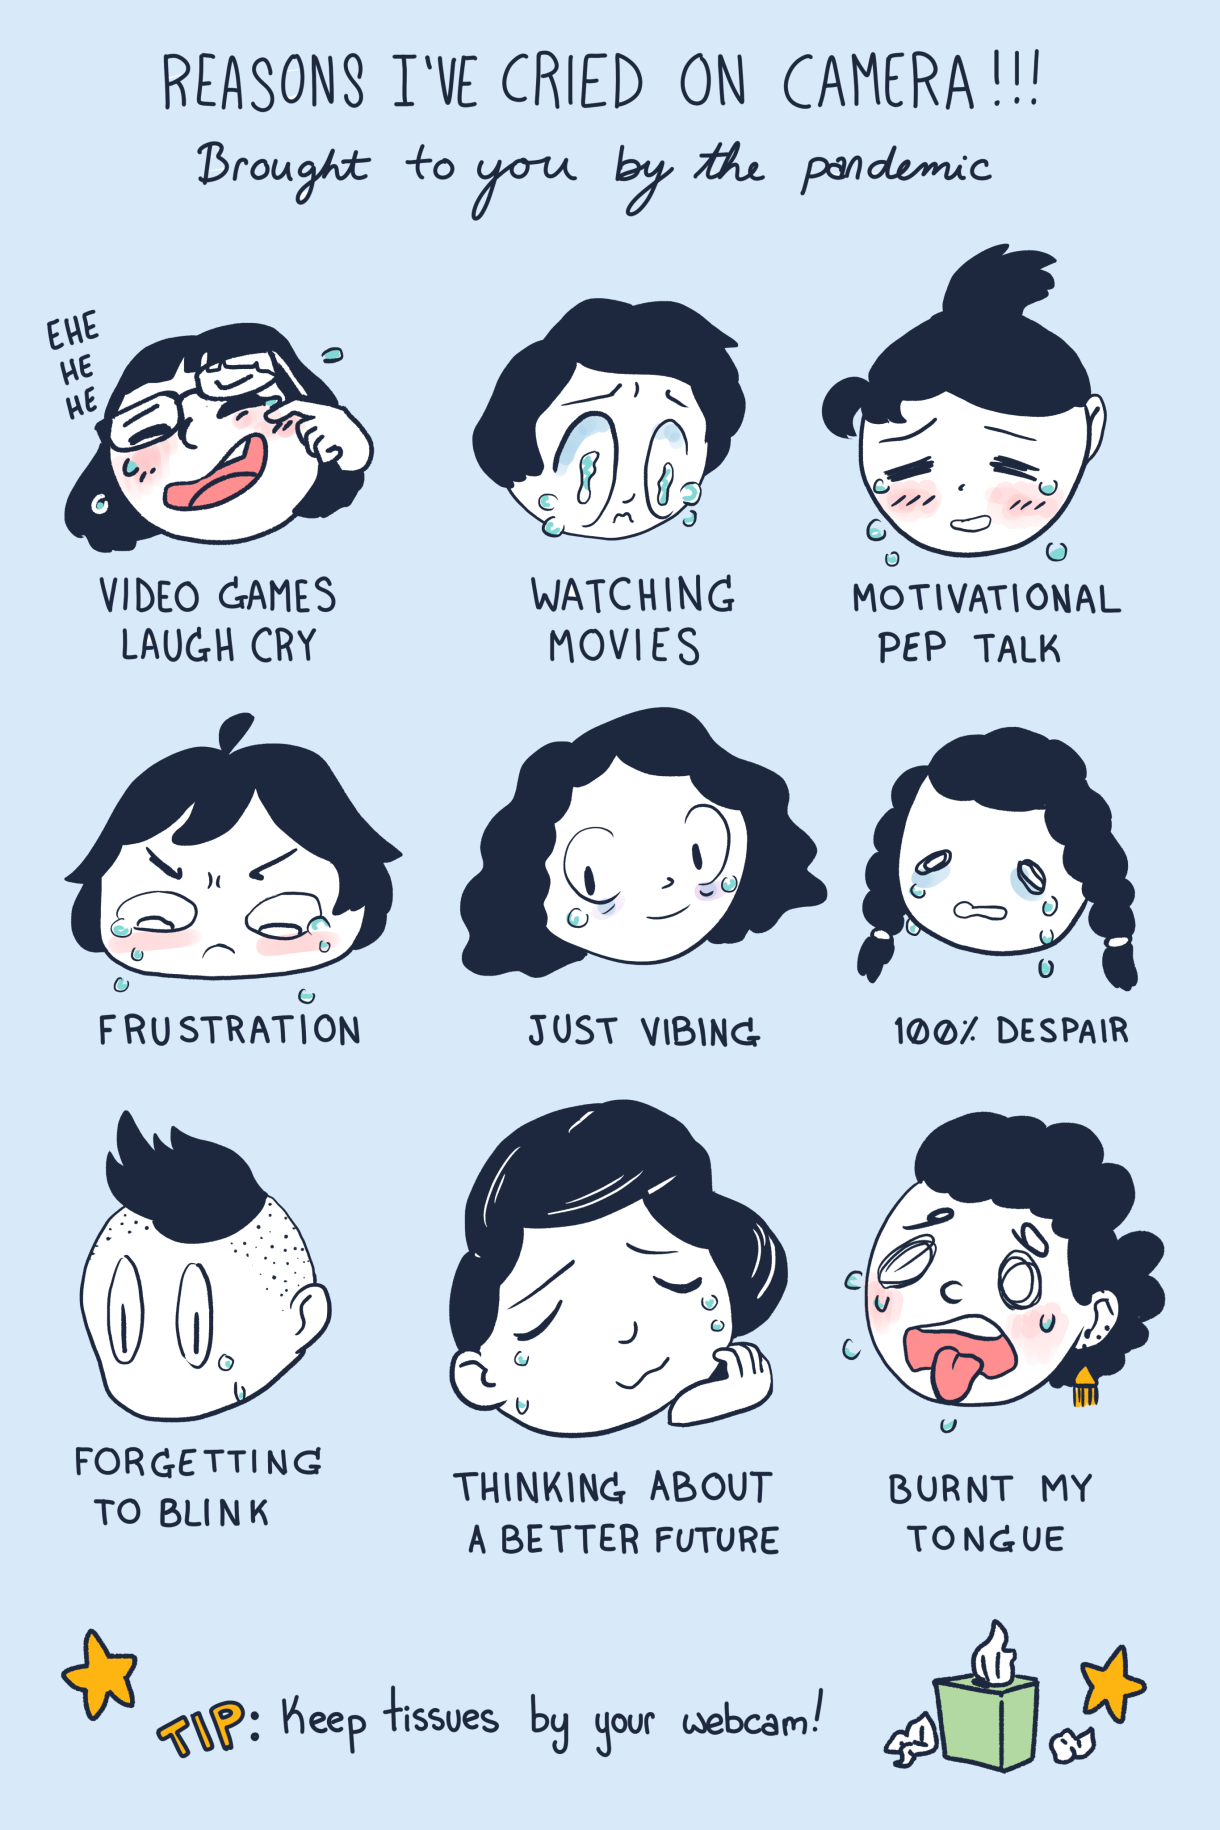 A chart of the "9 Reasons I've Cried on Camera, Brought to You by the Pandemic." There are 9 queer faces against a light blue background. They are: 1. "Video Games Laugh Cry" 2. "Watching Movies" 3. "Motivational Pep Talk" 4. "Frustration" 5. "Just Vibing" 6. 100% Despair" 7. "Forgetting to Blink" 8. "Thinking About A Better Future" and finally 9. "Burnt My Tongue"